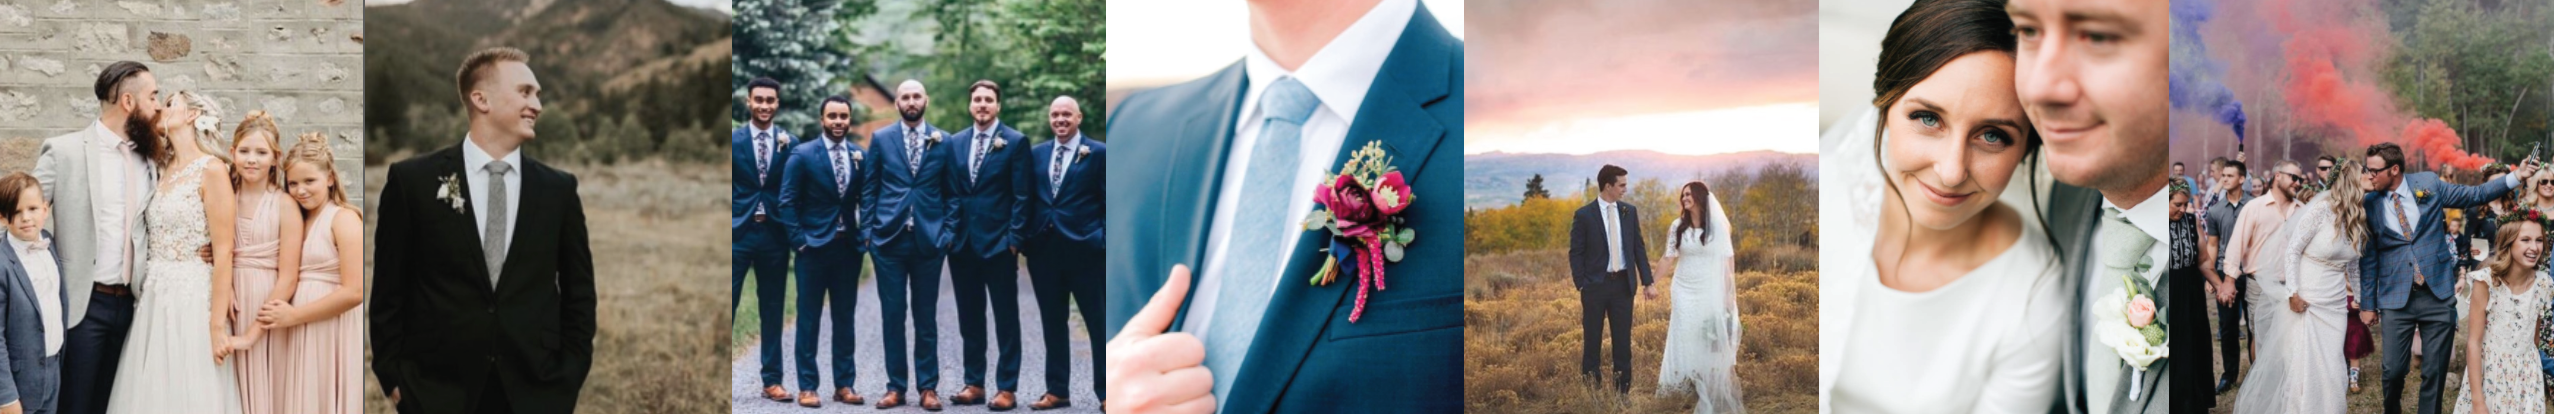 matching wedding ties for the whole family